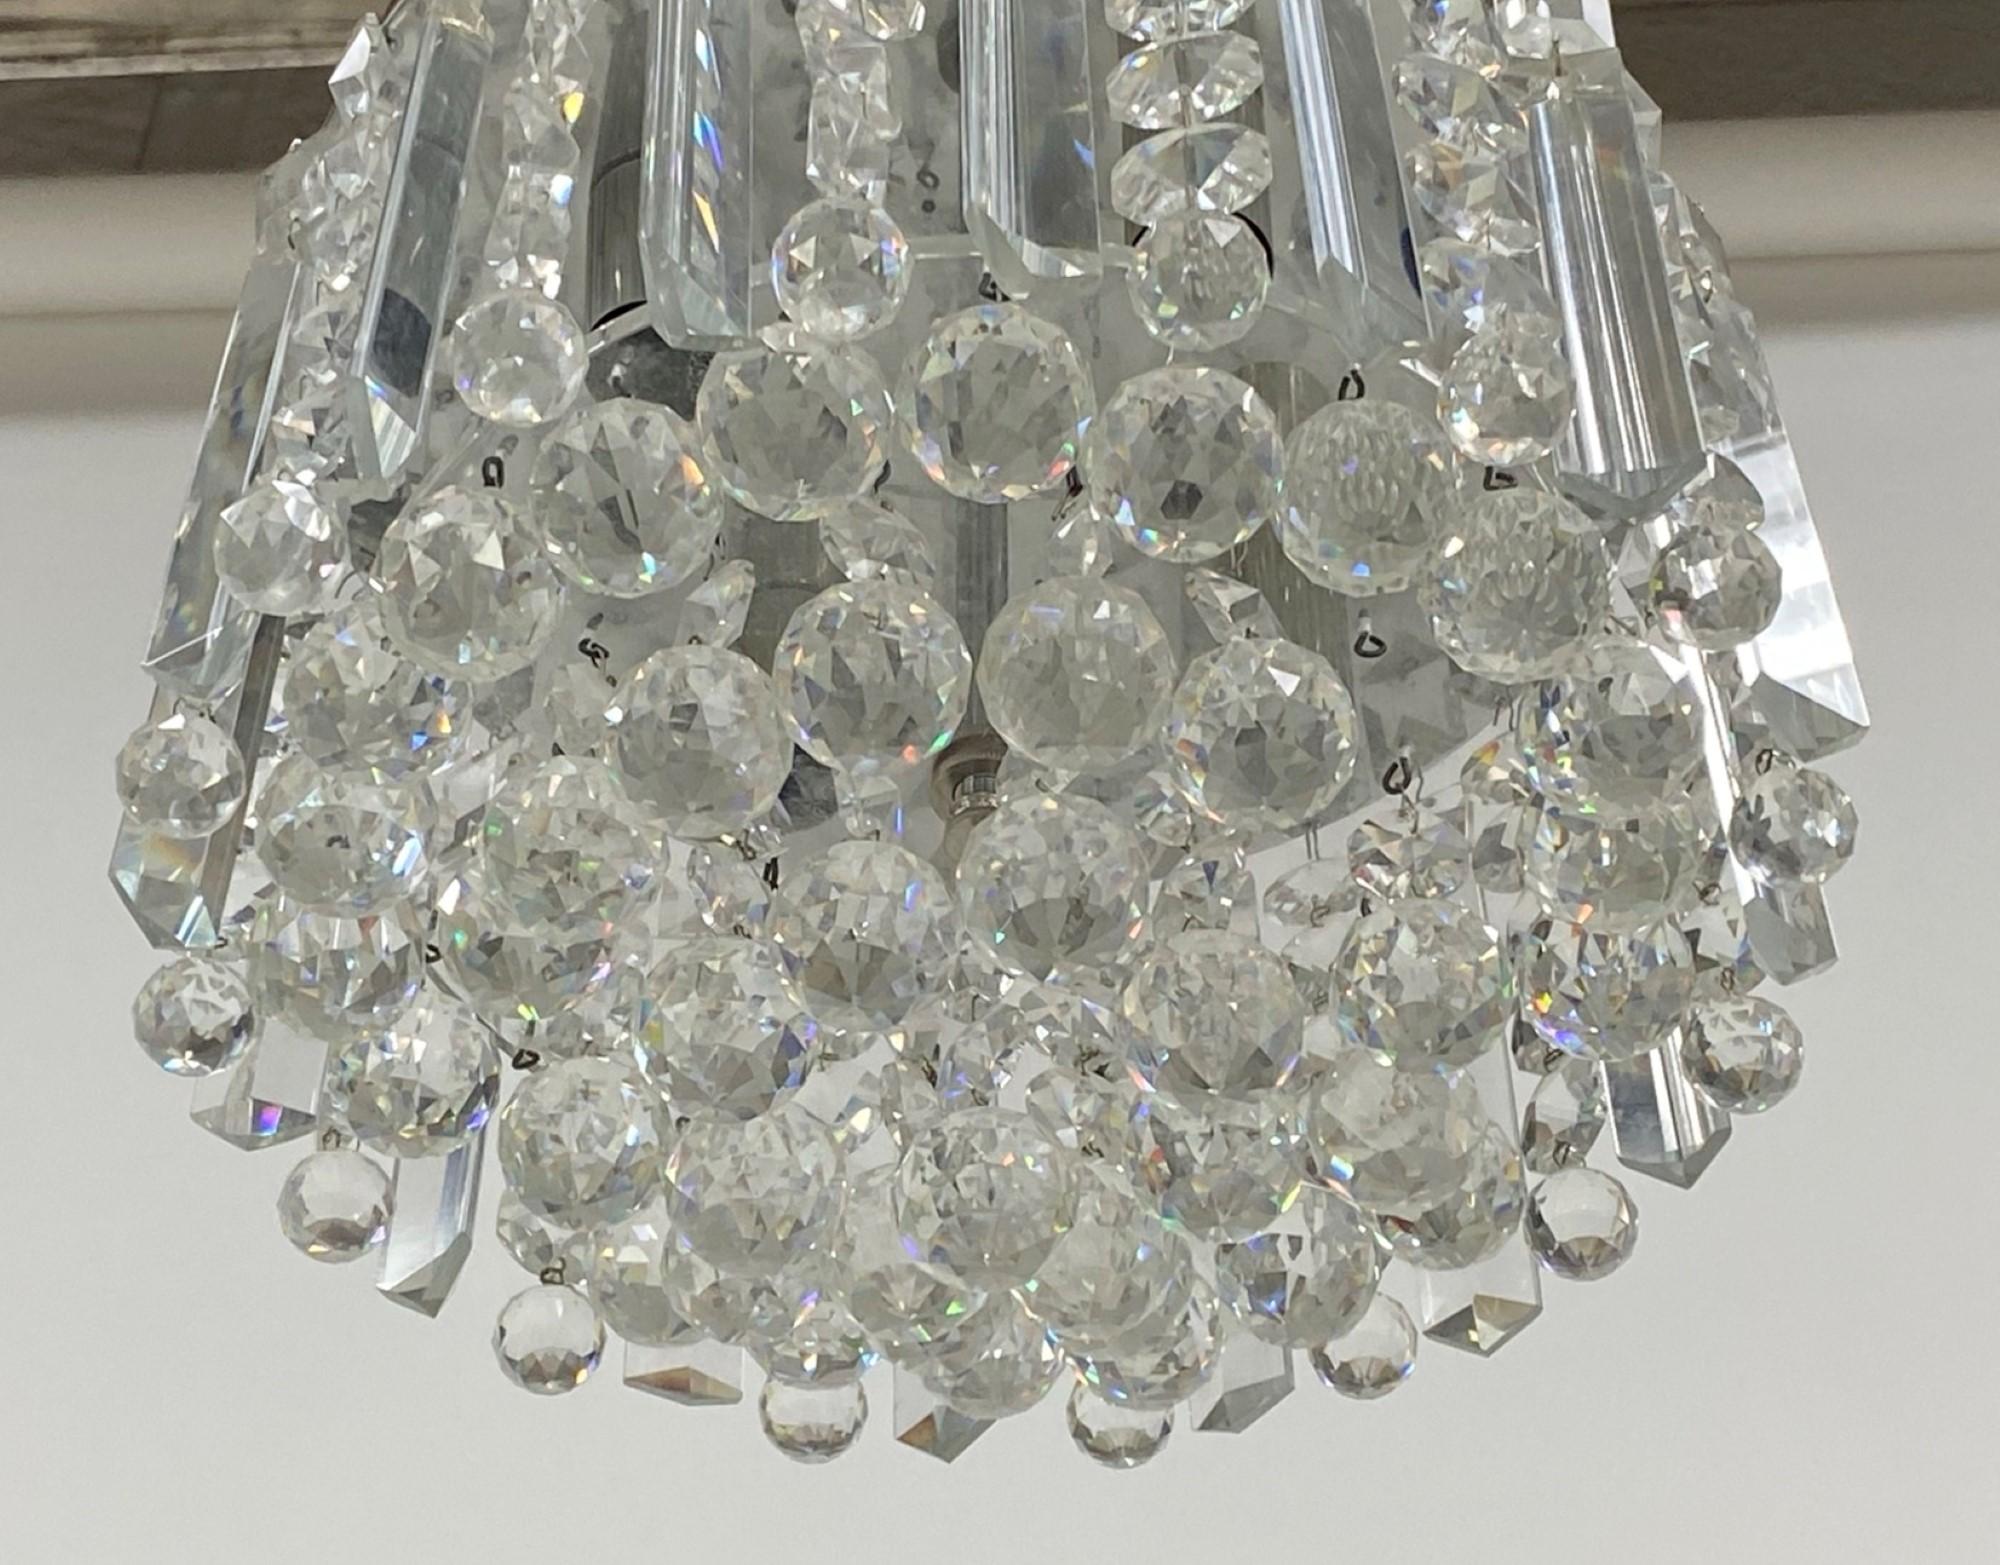 Polished Mid-Century Modern Crystal Flush Mount Chandelier from Beverly Hills